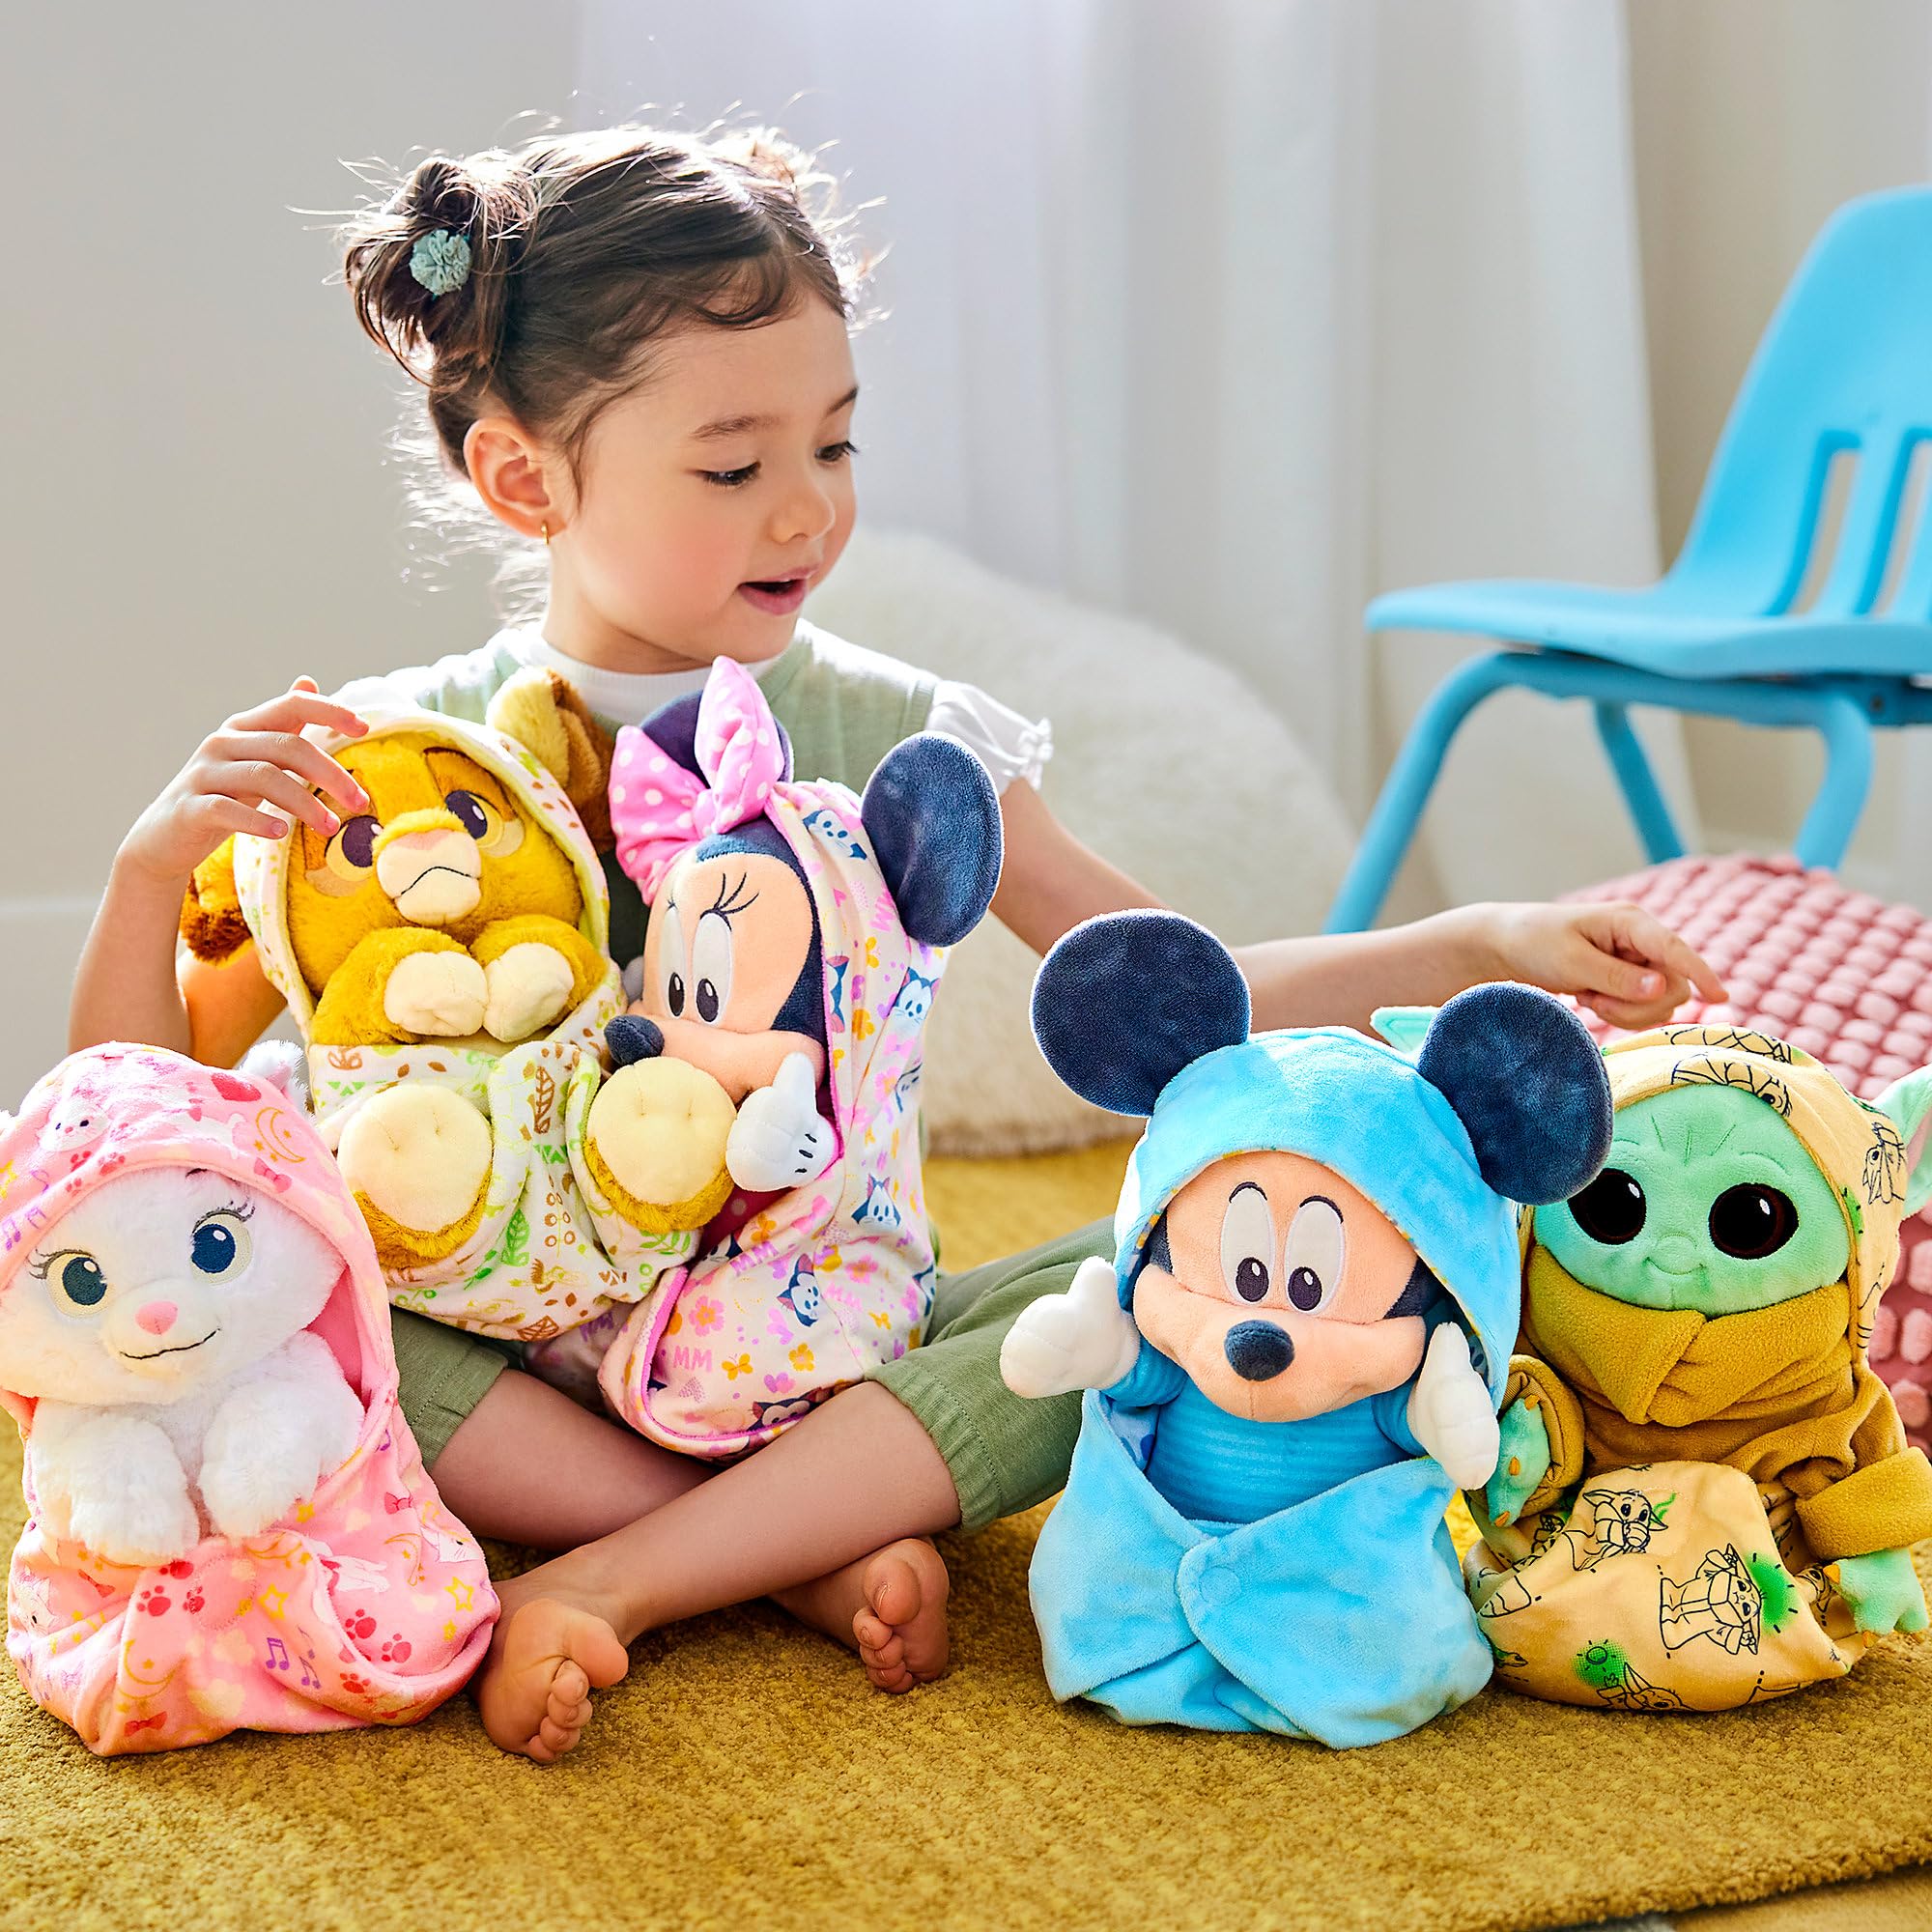 Disney Store Official Star Wars 10-Inch Grogu Plush in Swaddle - The Child' Design from The Mandalorian Series Babies Edition - Soft & Cuddly Toy for Fans & Kids